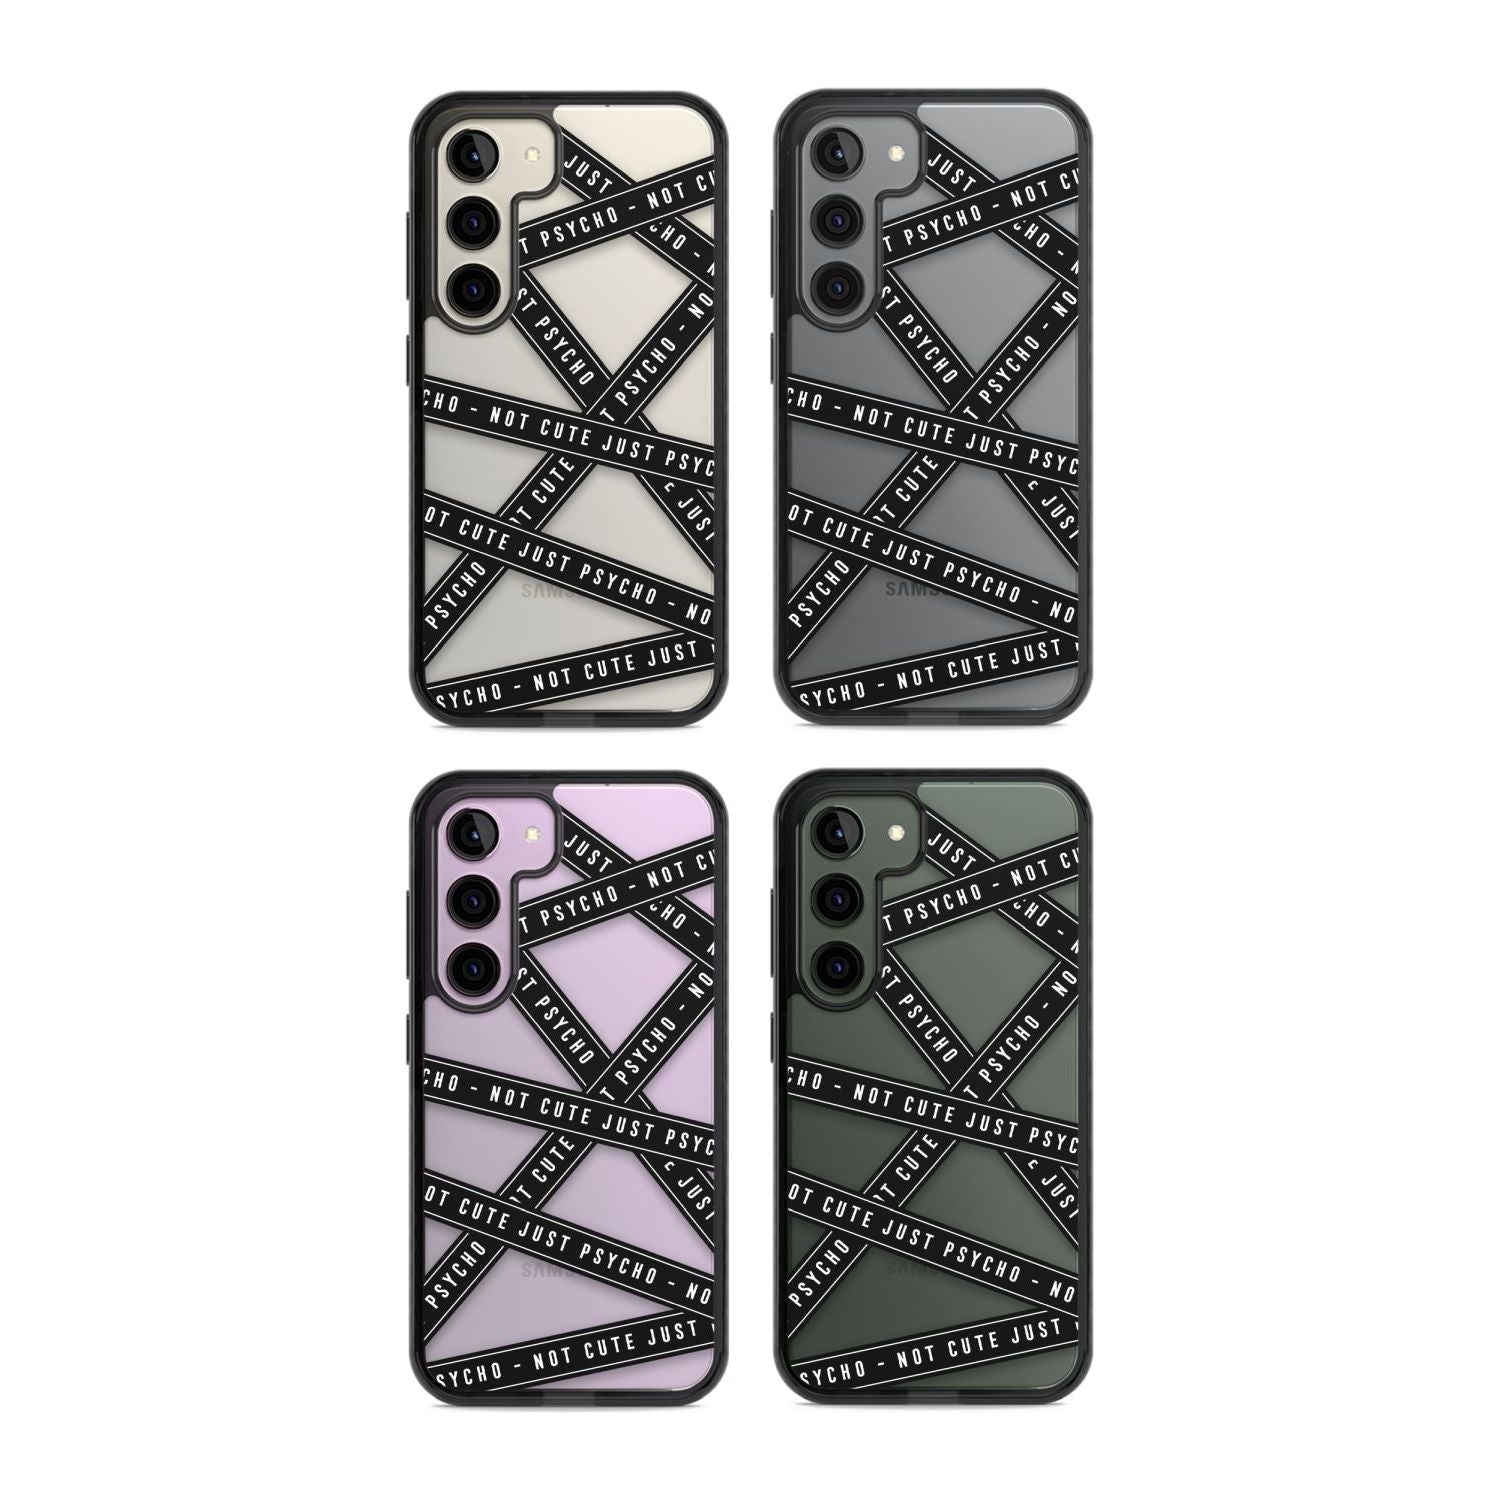 Caution Tape (Clear) Not Cute Just Psycho Phone Case iPhone 15 Pro Max / Black Impact Case,iPhone 15 Plus / Black Impact Case,iPhone 15 Pro / Black Impact Case,iPhone 15 / Black Impact Case,iPhone 15 Pro Max / Impact Case,iPhone 15 Plus / Impact Case,iPhone 15 Pro / Impact Case,iPhone 15 / Impact Case,iPhone 15 Pro Max / Magsafe Black Impact Case,iPhone 15 Plus / Magsafe Black Impact Case,iPhone 15 Pro / Magsafe Black Impact Case,iPhone 15 / Magsafe Black Impact Case,iPhone 14 Pro Max / Black Impact Case,iP